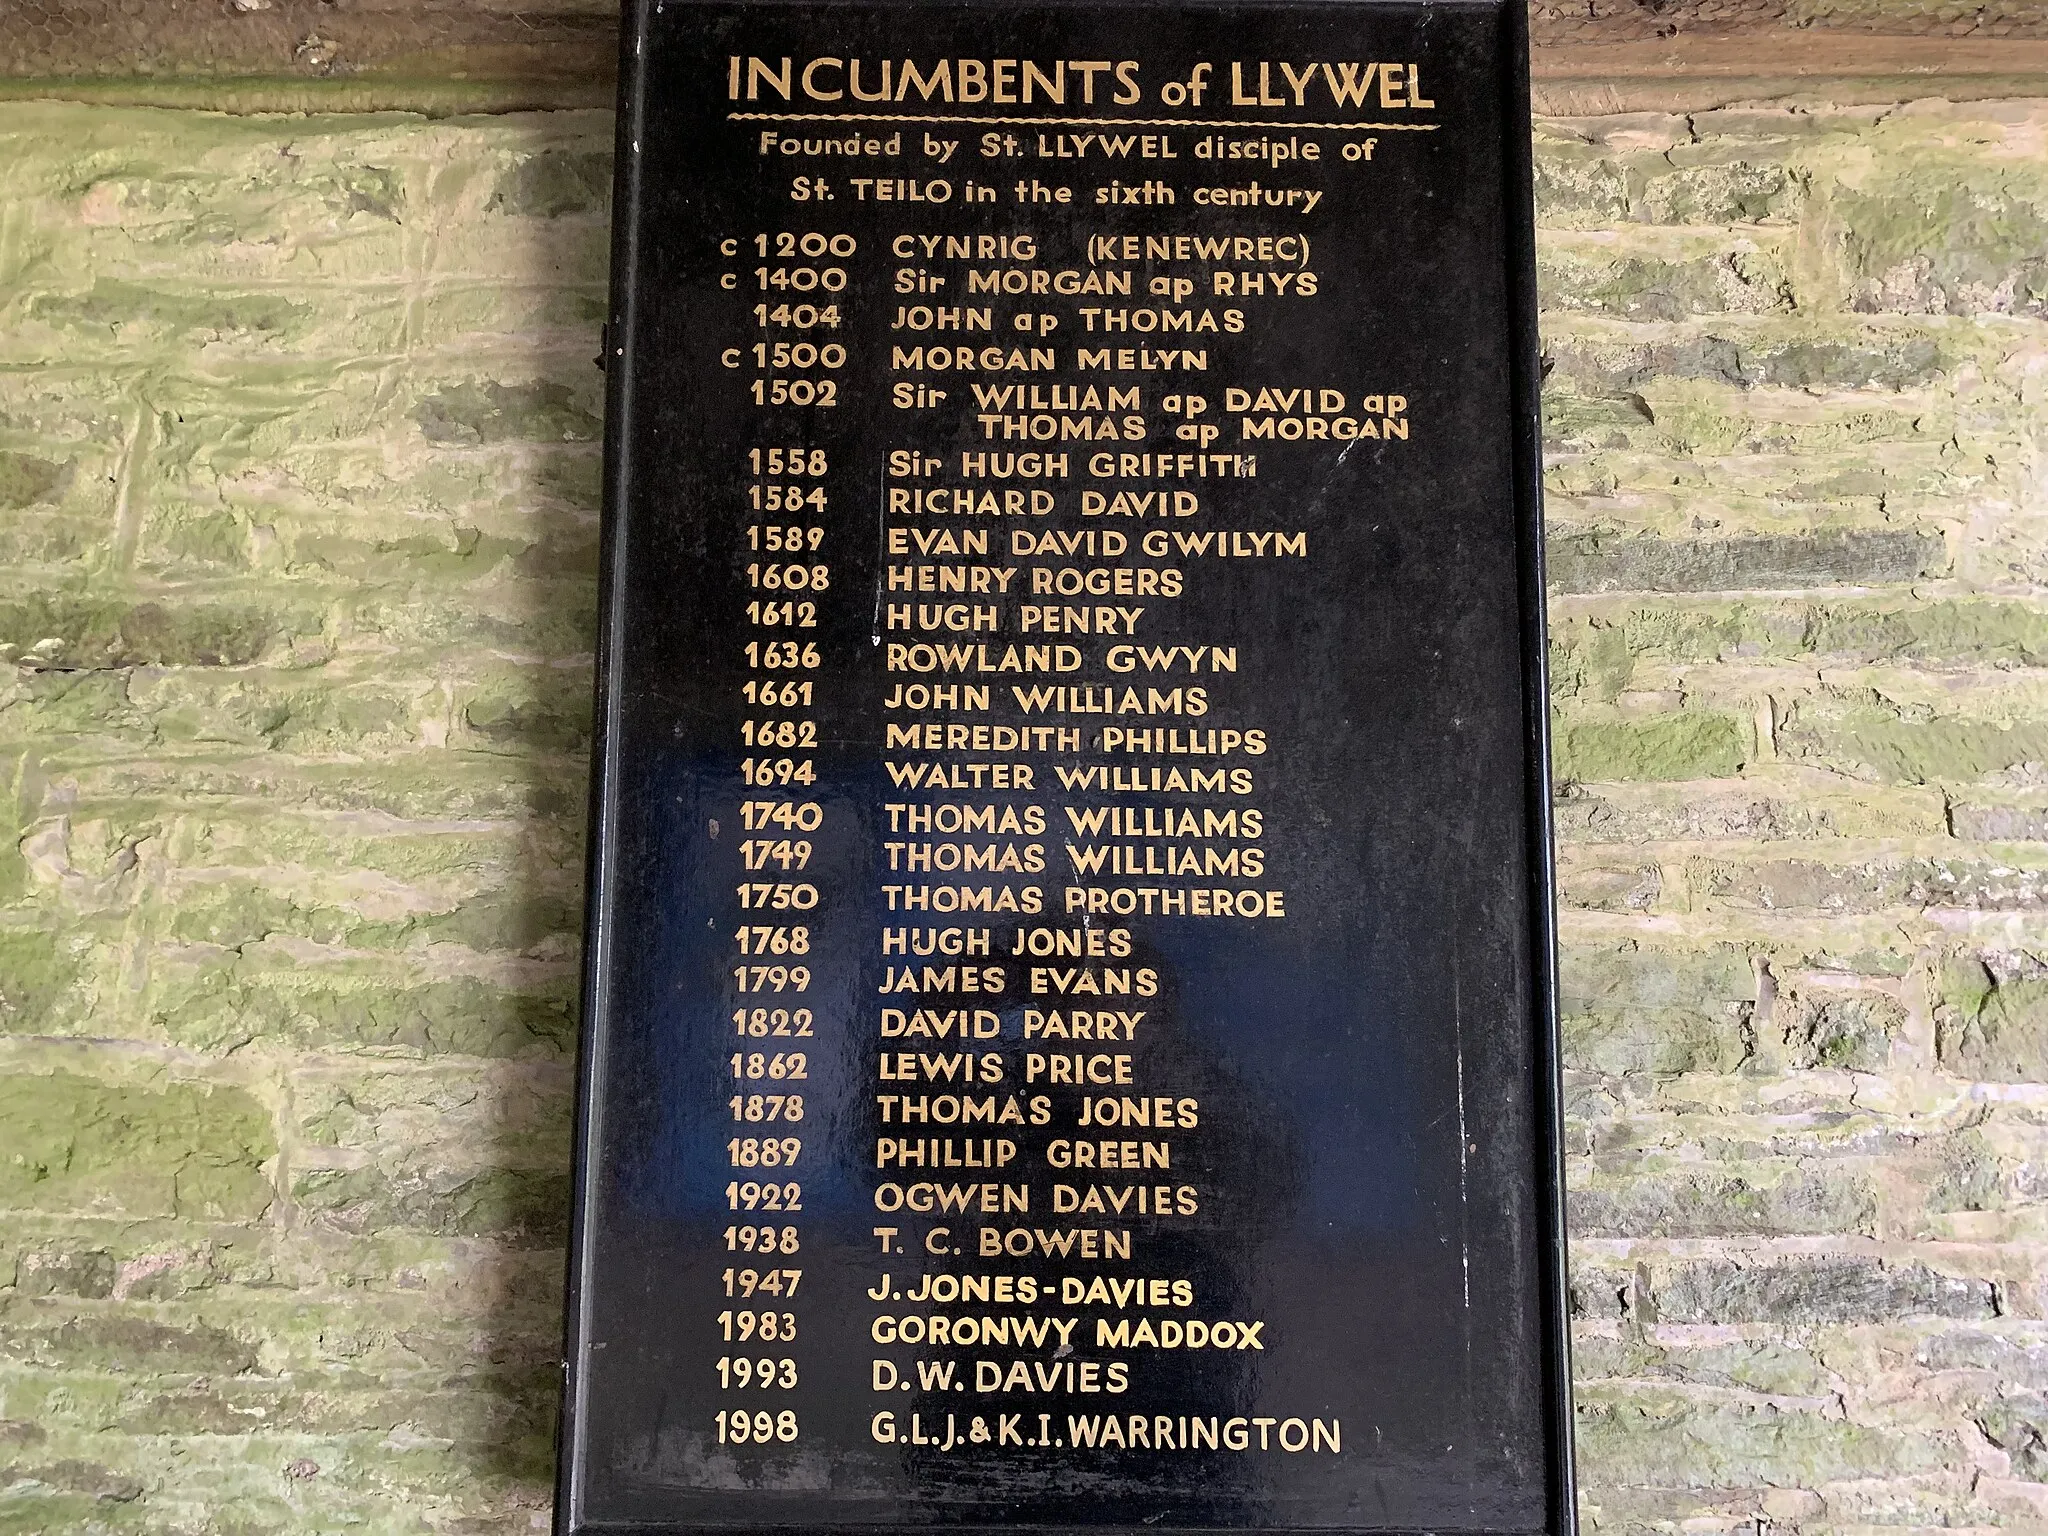 Photo showing: List of vicars of St David's Church, Llywel, Breconshire